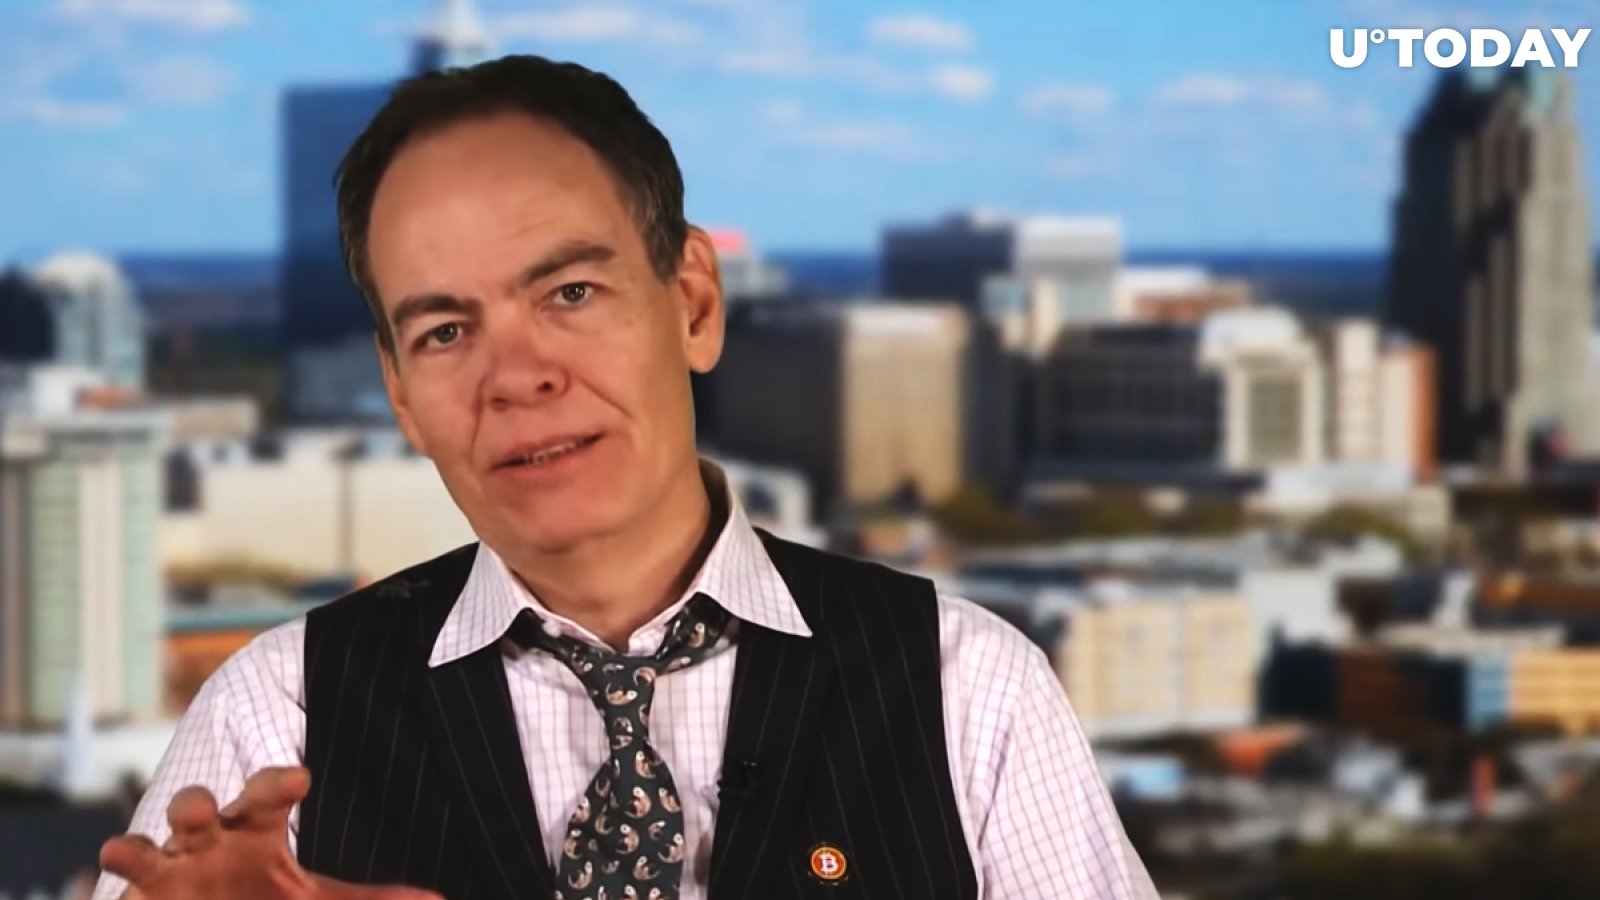 Max Keiser Believes Nassim Taleb Is Fundamentally Wrong About Bitcoin, Here's Why